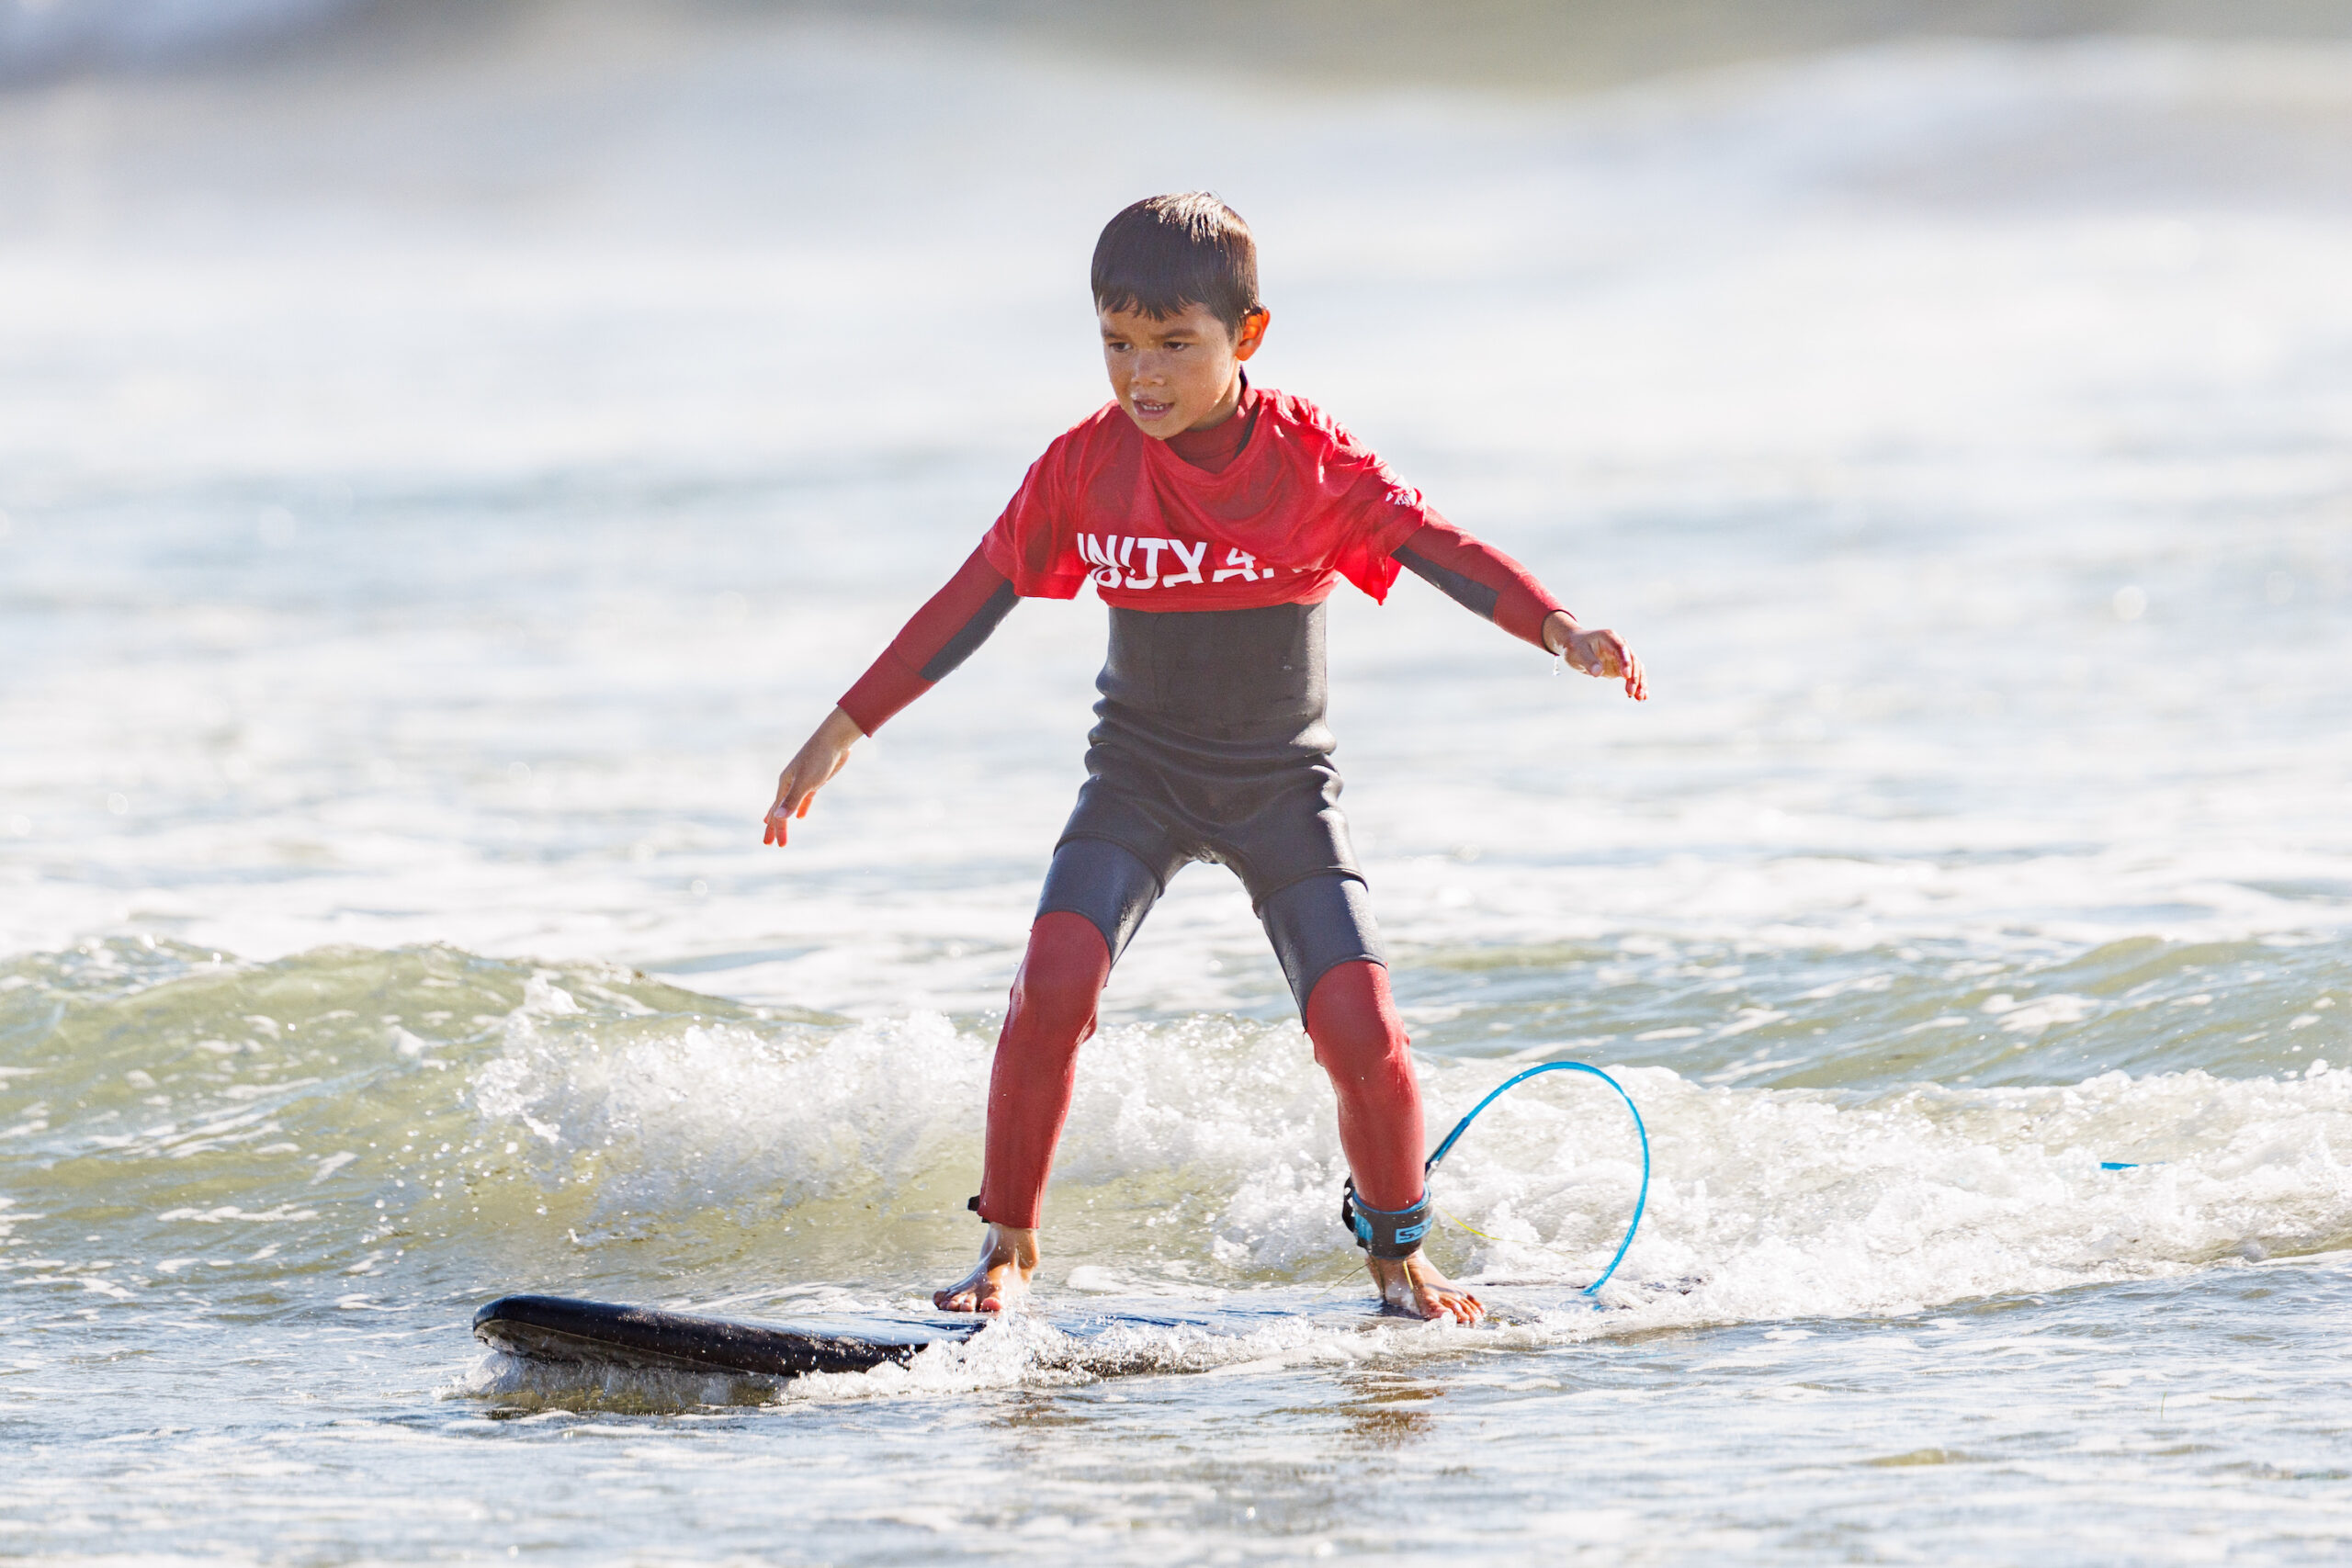 A young volunteer surfing at San Diego charity Unity 4 Orphans' Wave-a-Thon